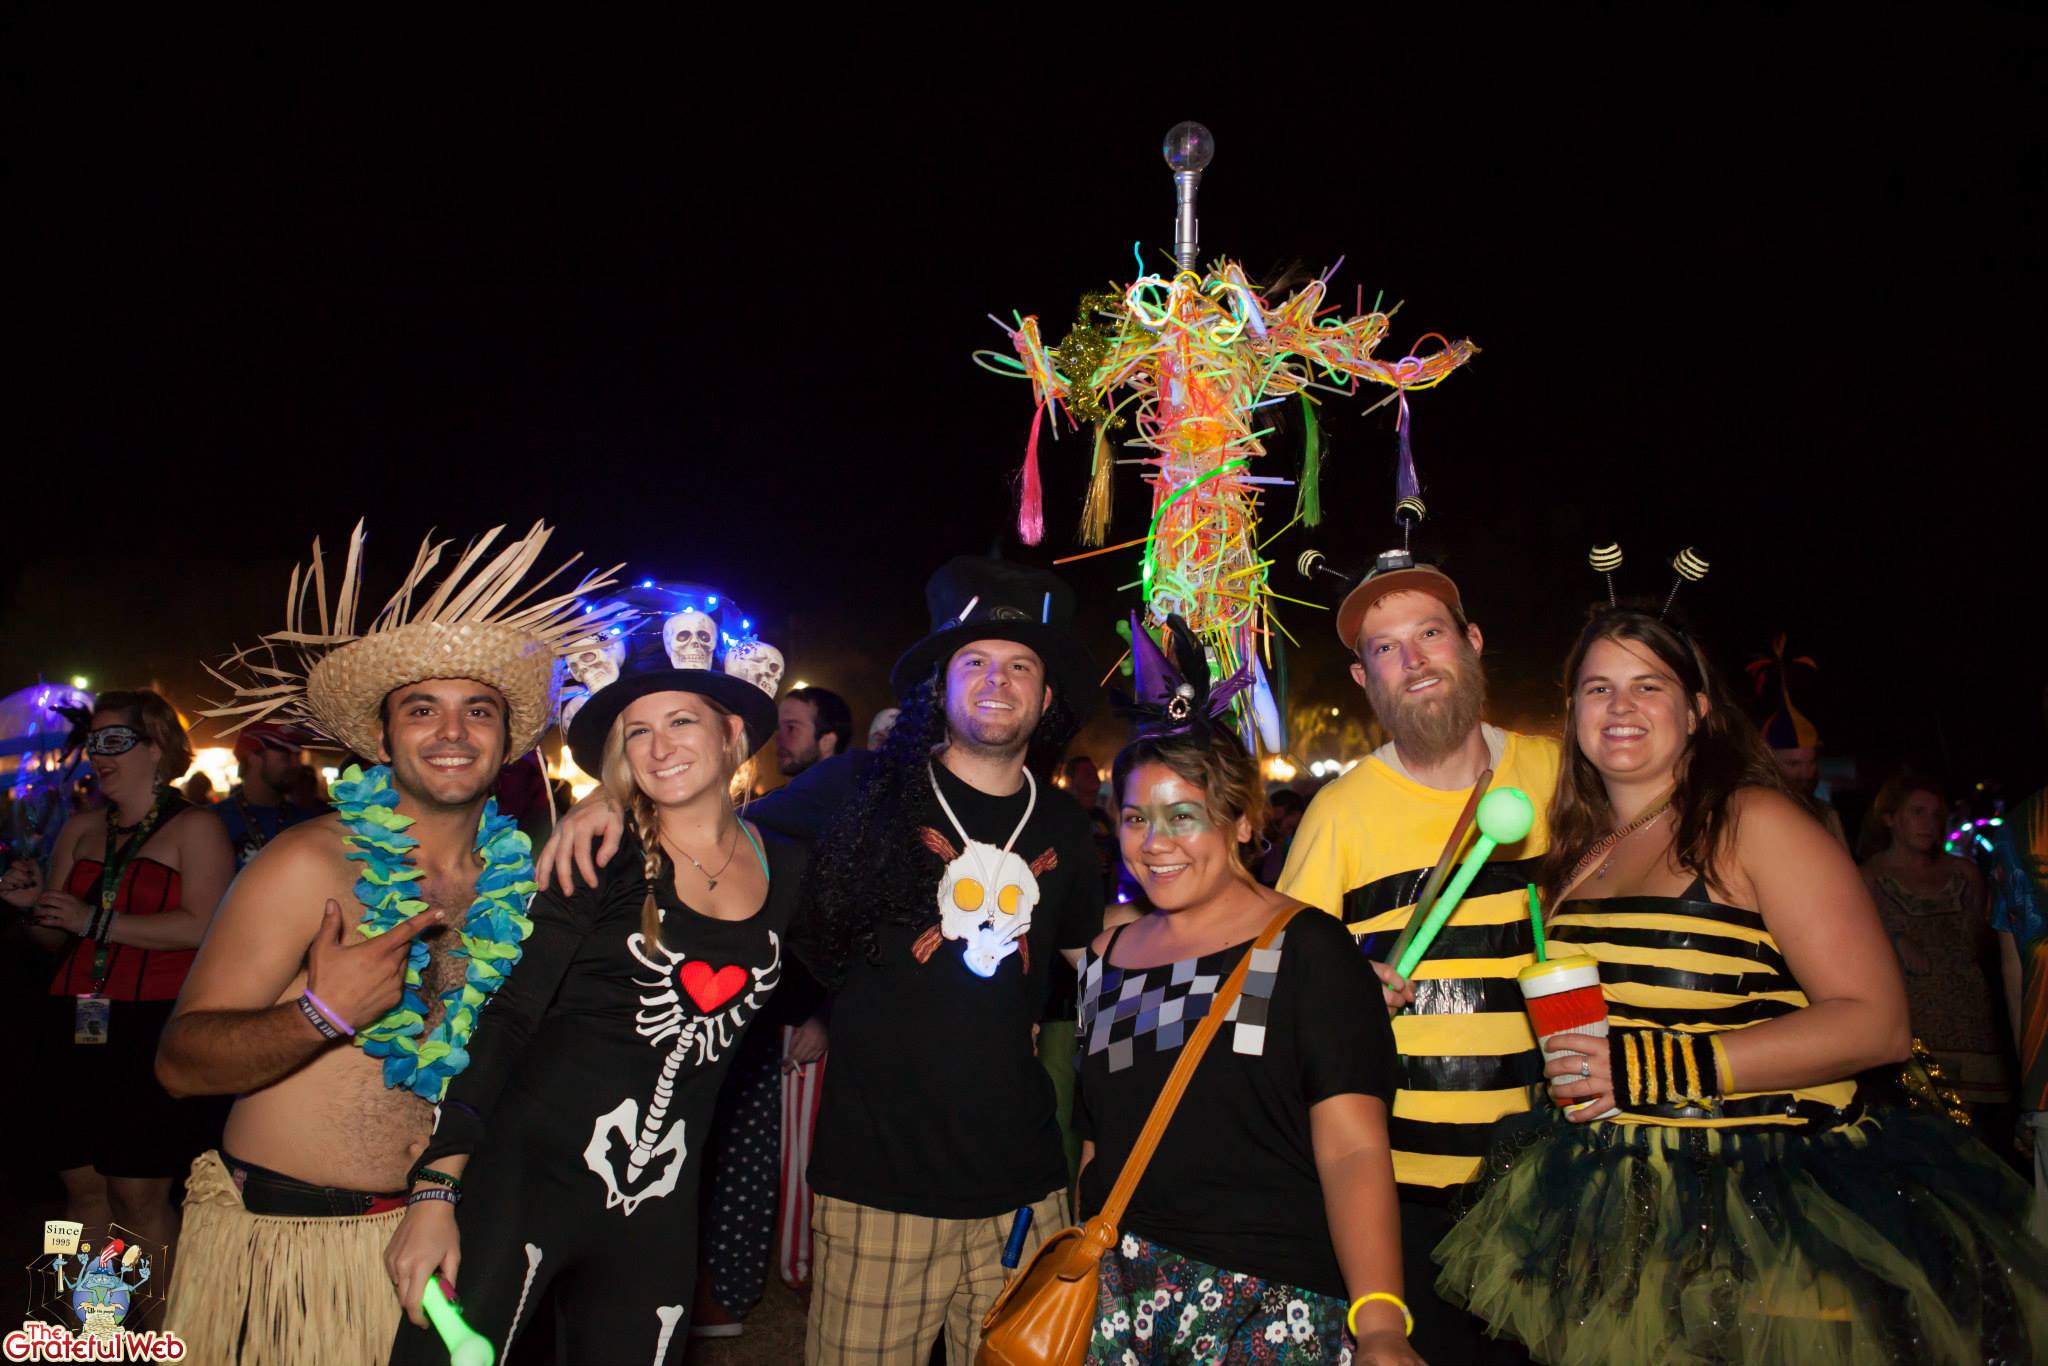 Suwannee Hulaween 2013 | Review and Photos